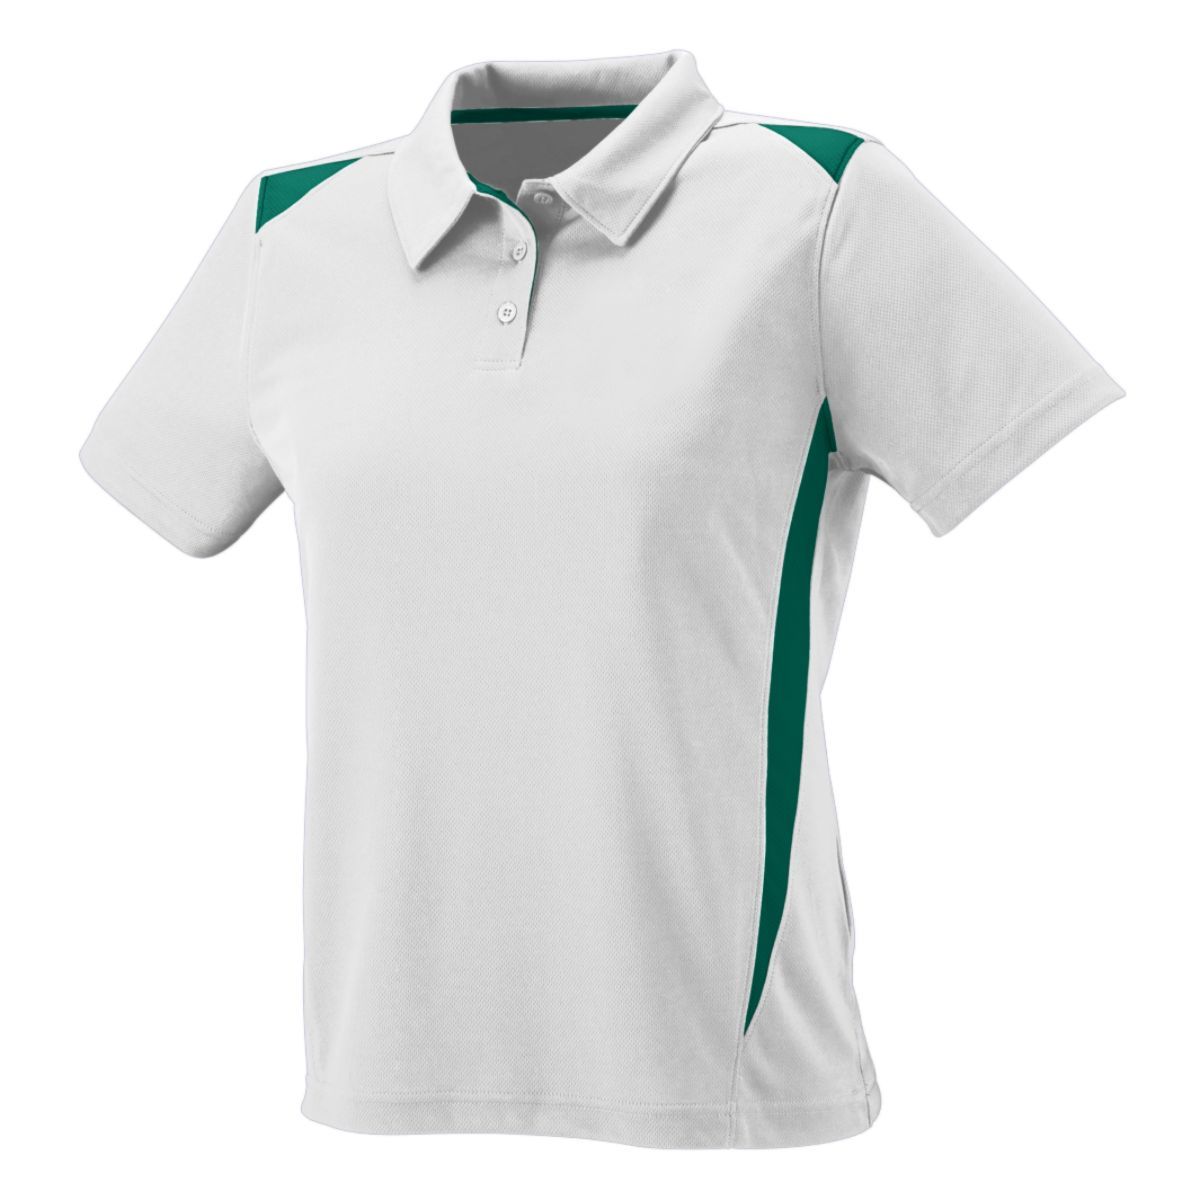 Augusta Sportswear Ladies Premier Polo in White/Dark Green  -Part of the Ladies, Ladies-Polo, Polos, Augusta-Products, Shirts product lines at KanaleyCreations.com